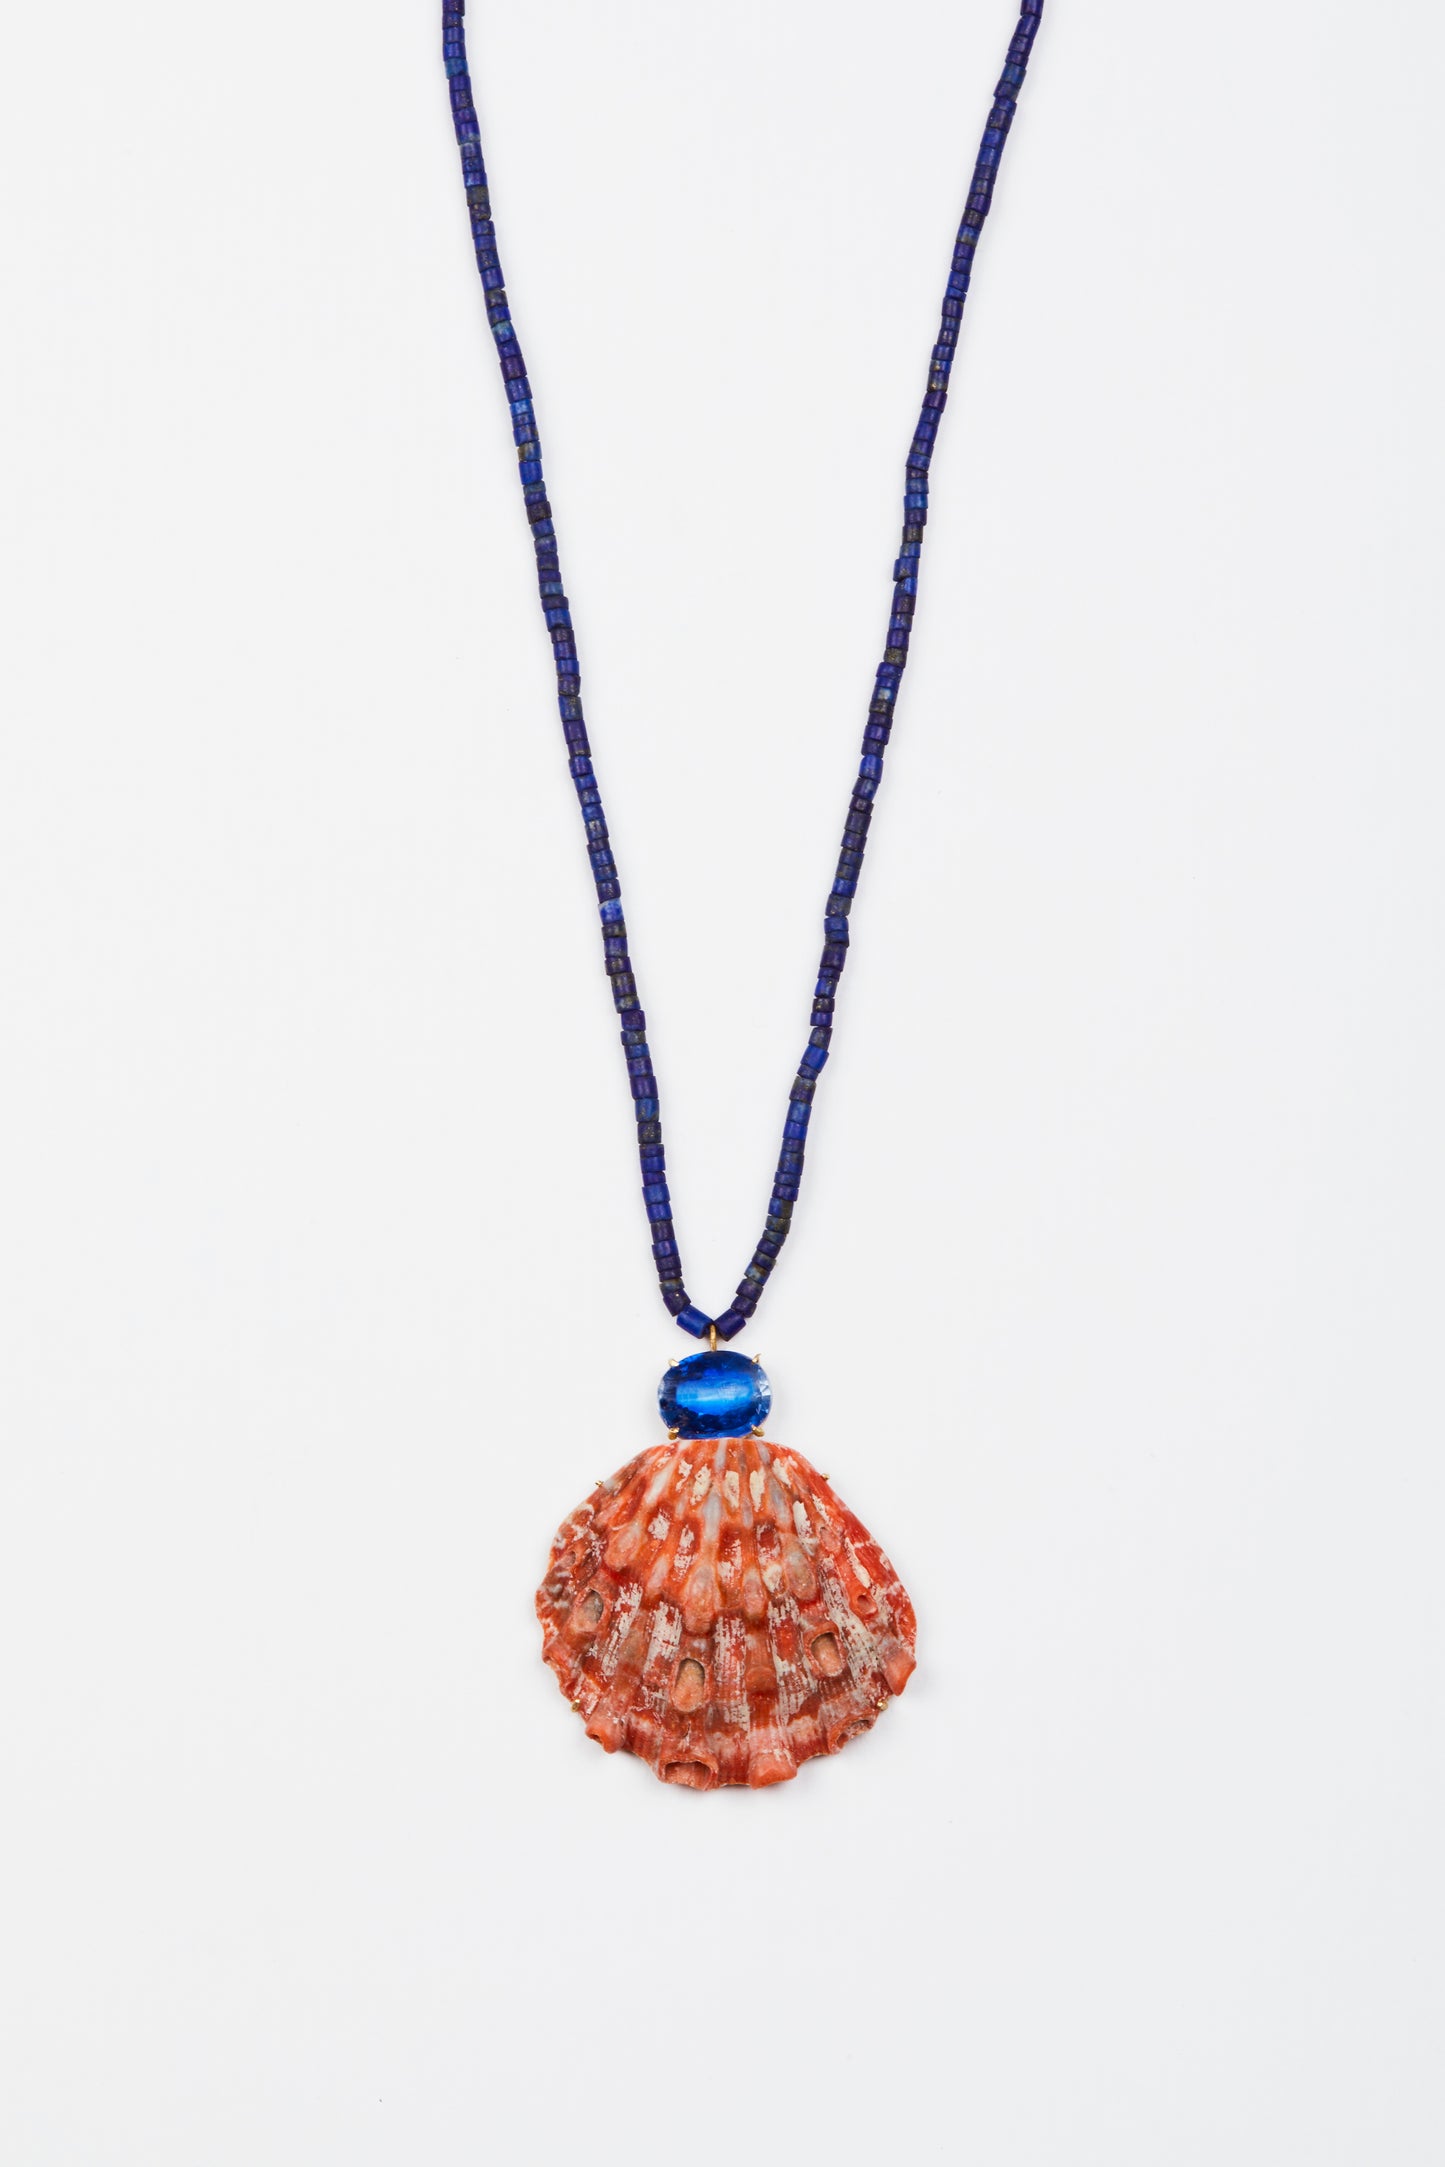 Lapis Beads with Orange Shell and Kyanite